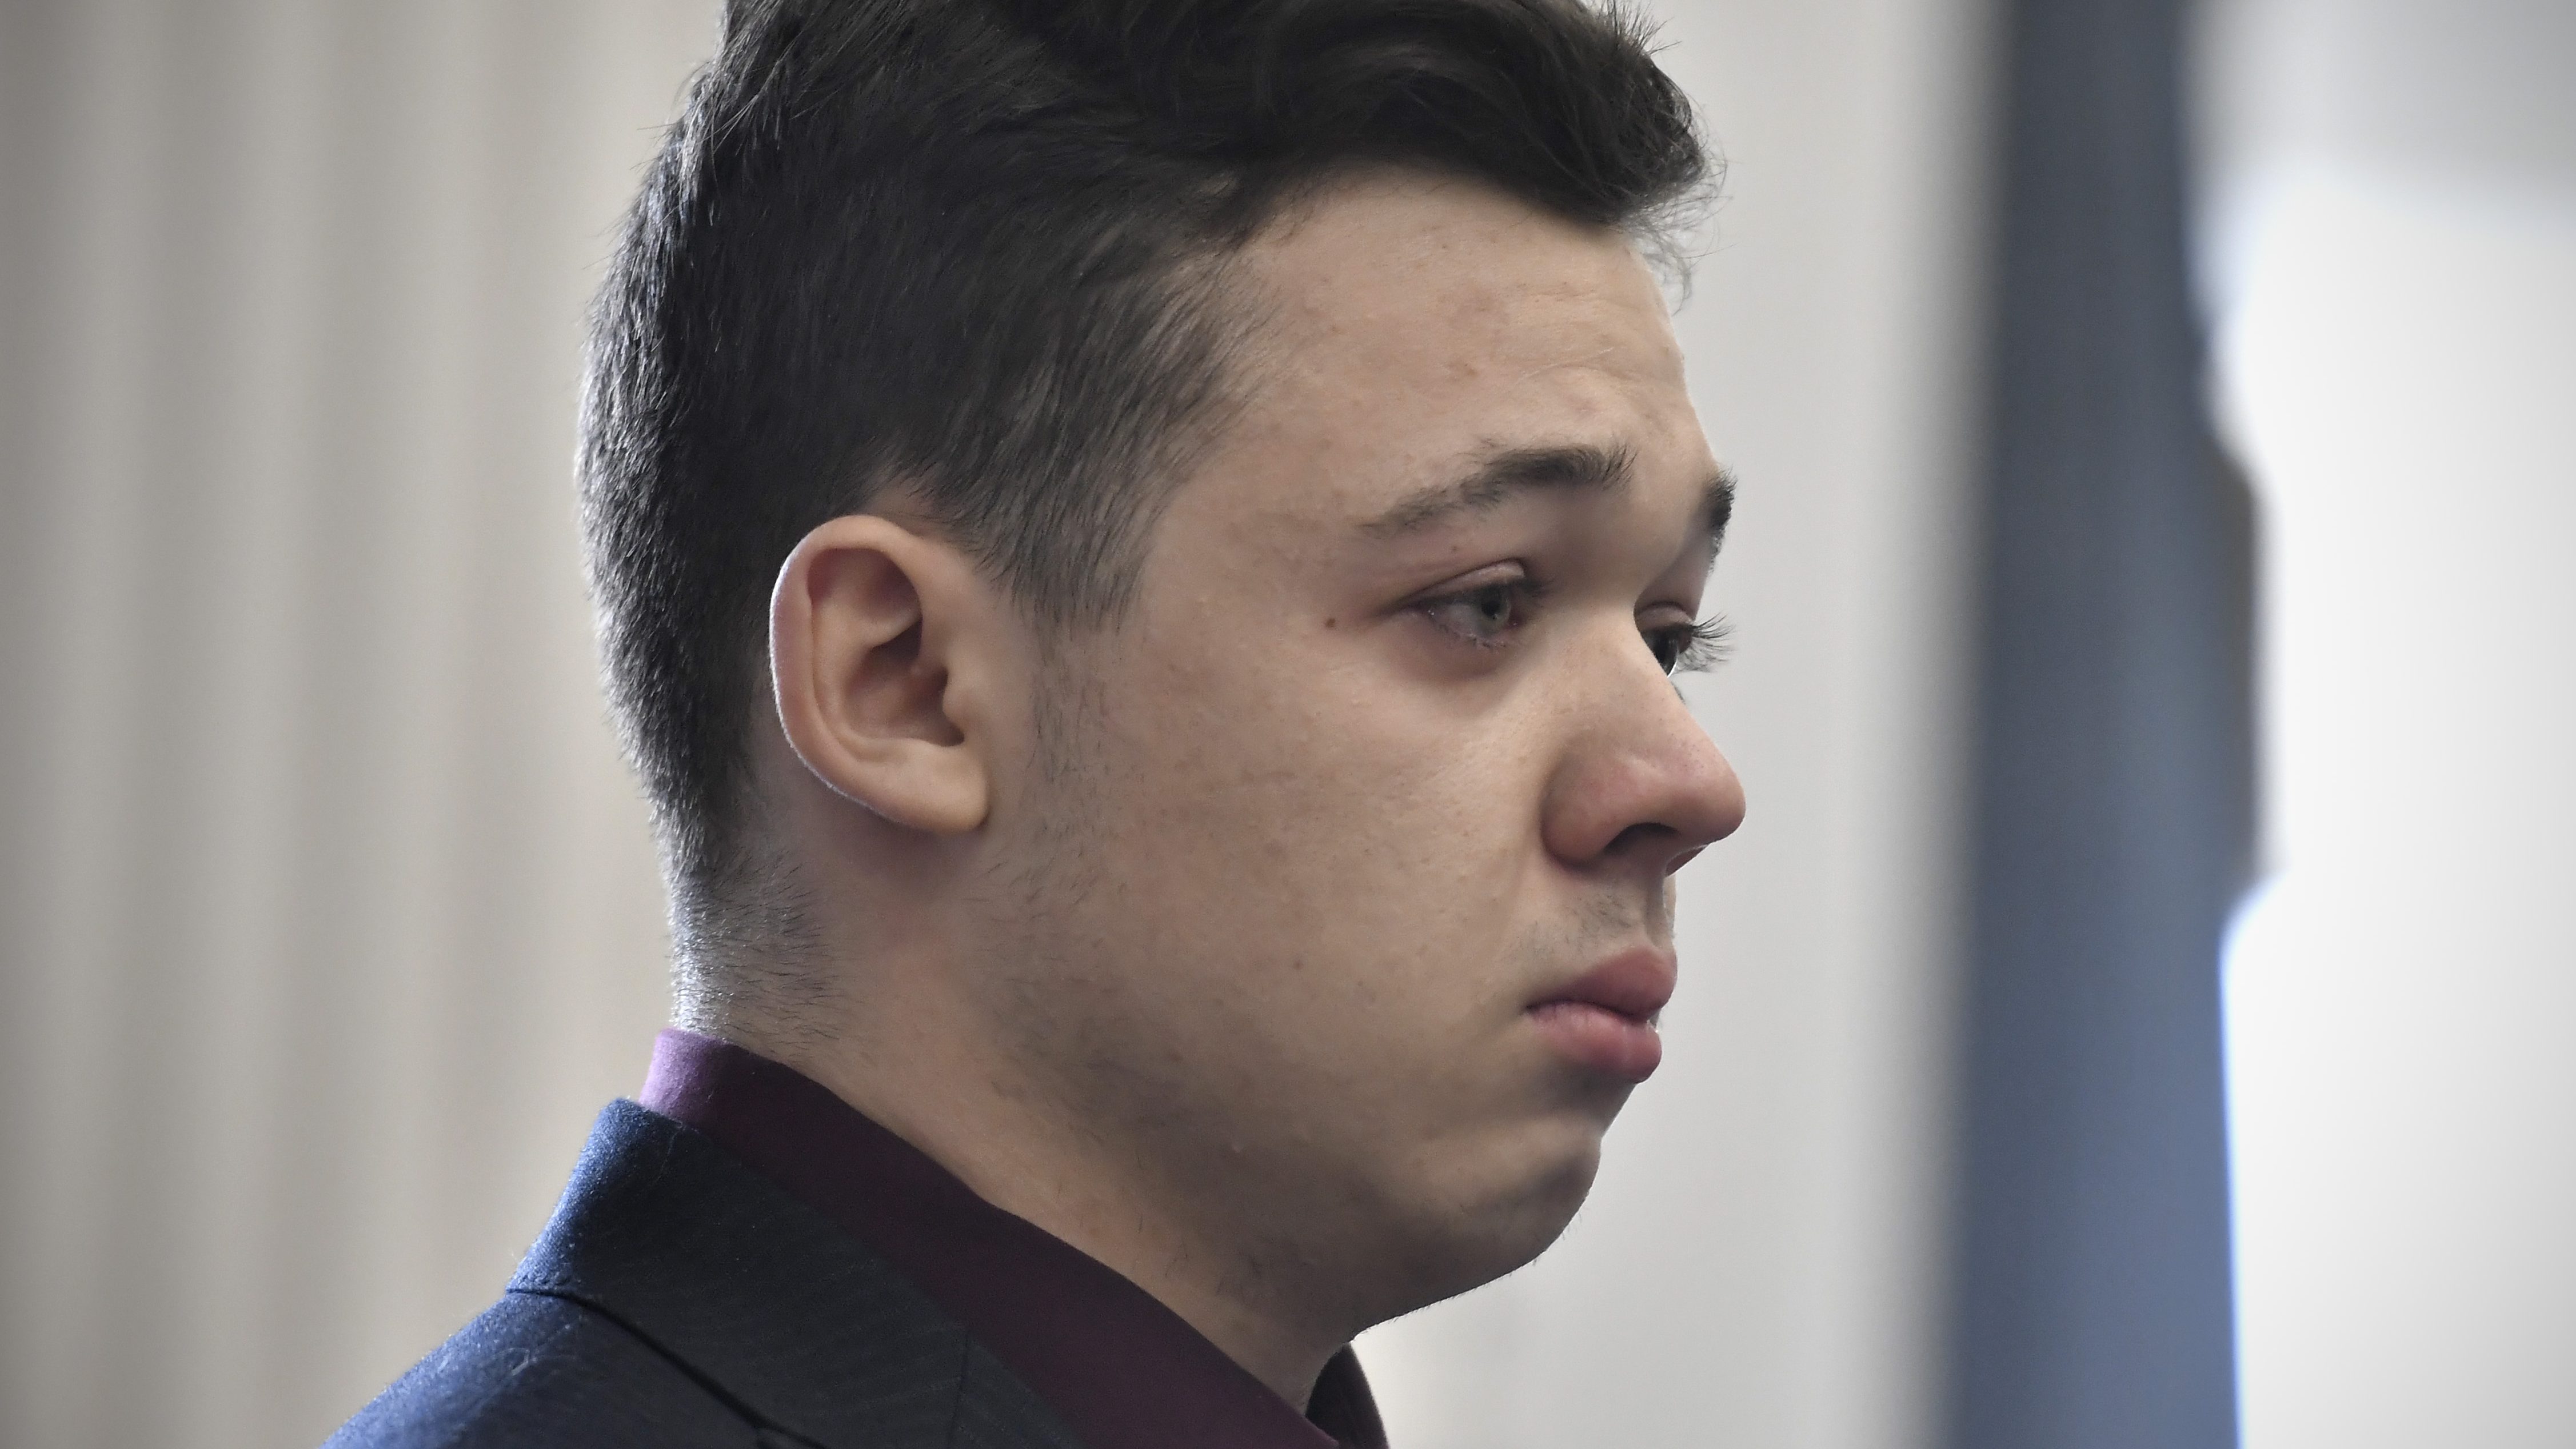 Kyle Rittenhouse cries as he is found not guilty on all counts at the Kenosha County Courthouse on Nov. 19, 2021 in Kenosha, Wisconsin. Rittenhouse was found not guilty of all charges in the shooting of three demonstrators, killing two of them, during a night of unrest that erupted in Kenosha after a police officer shot Jacob Blake seven times in the back while being arrested in August 2020.